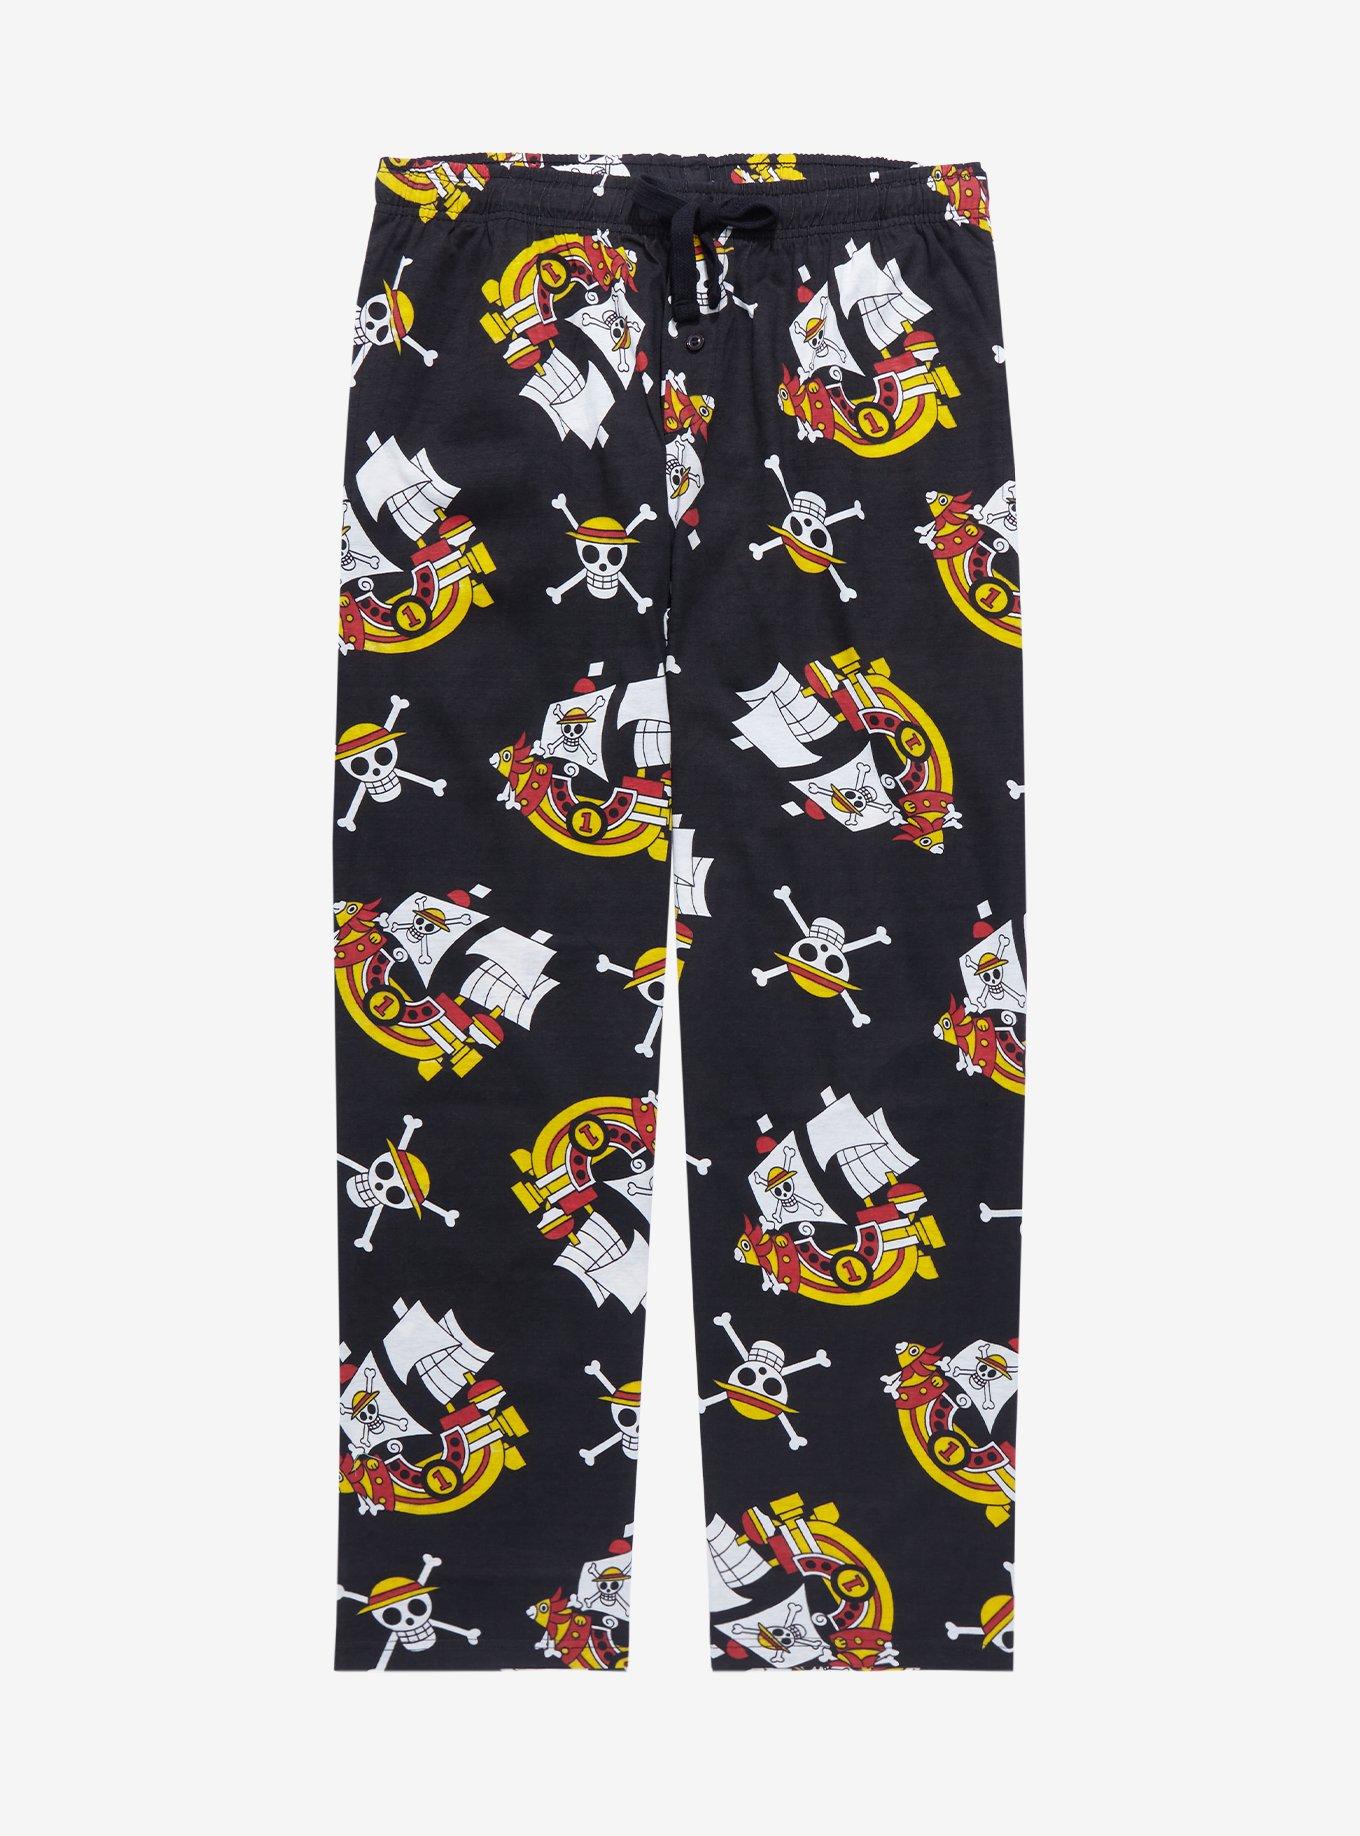 One Piece Thousand Sunny Allover Print Sleep Pants - BoxLunch Exclusive, BLACK, hi-res